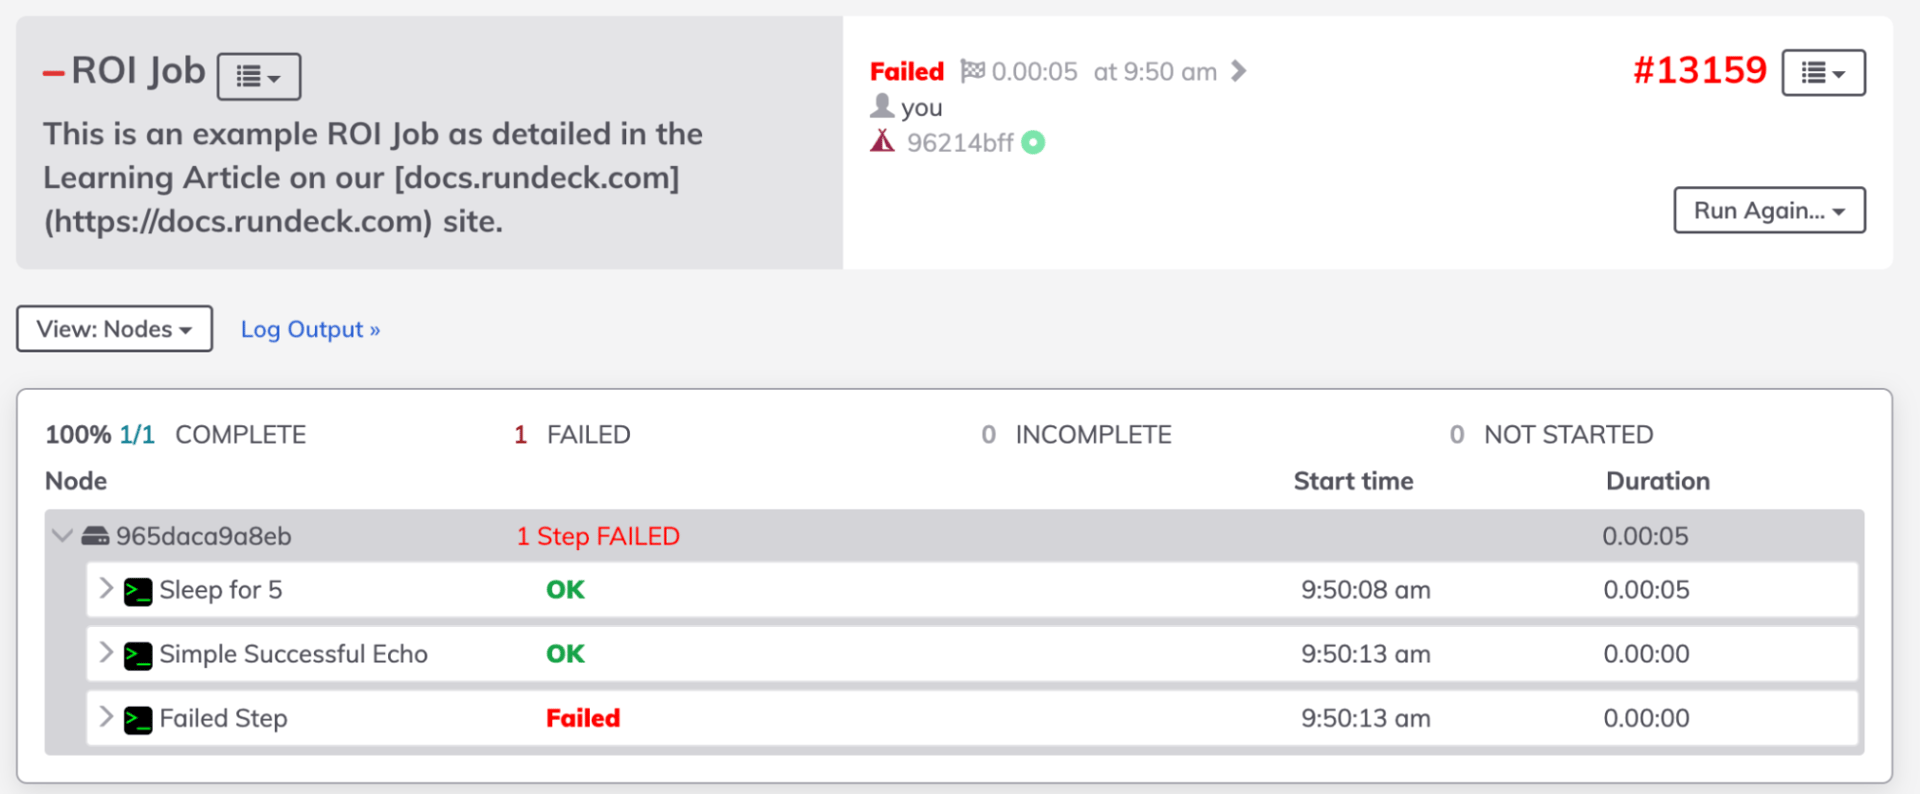 Screenshot of PagerDuty Process Automation showing detailed status information of an automation run, including 2 completed steps, 1 failed step, and overall failed status.